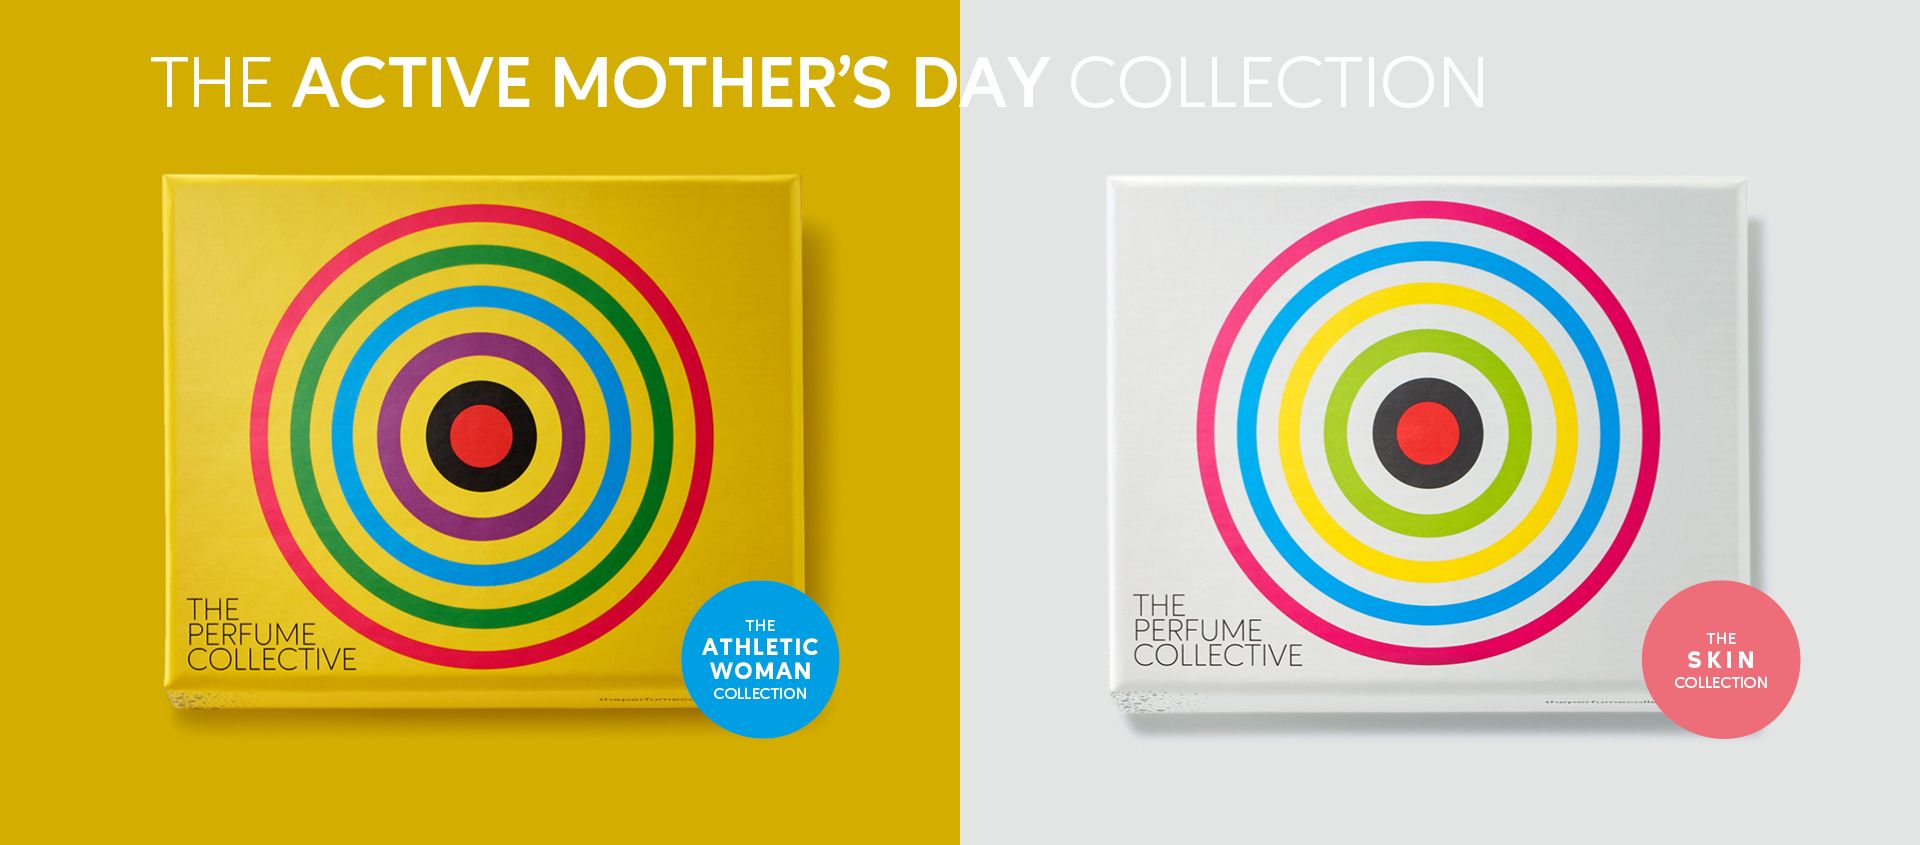 The Active Mother's Day Collection